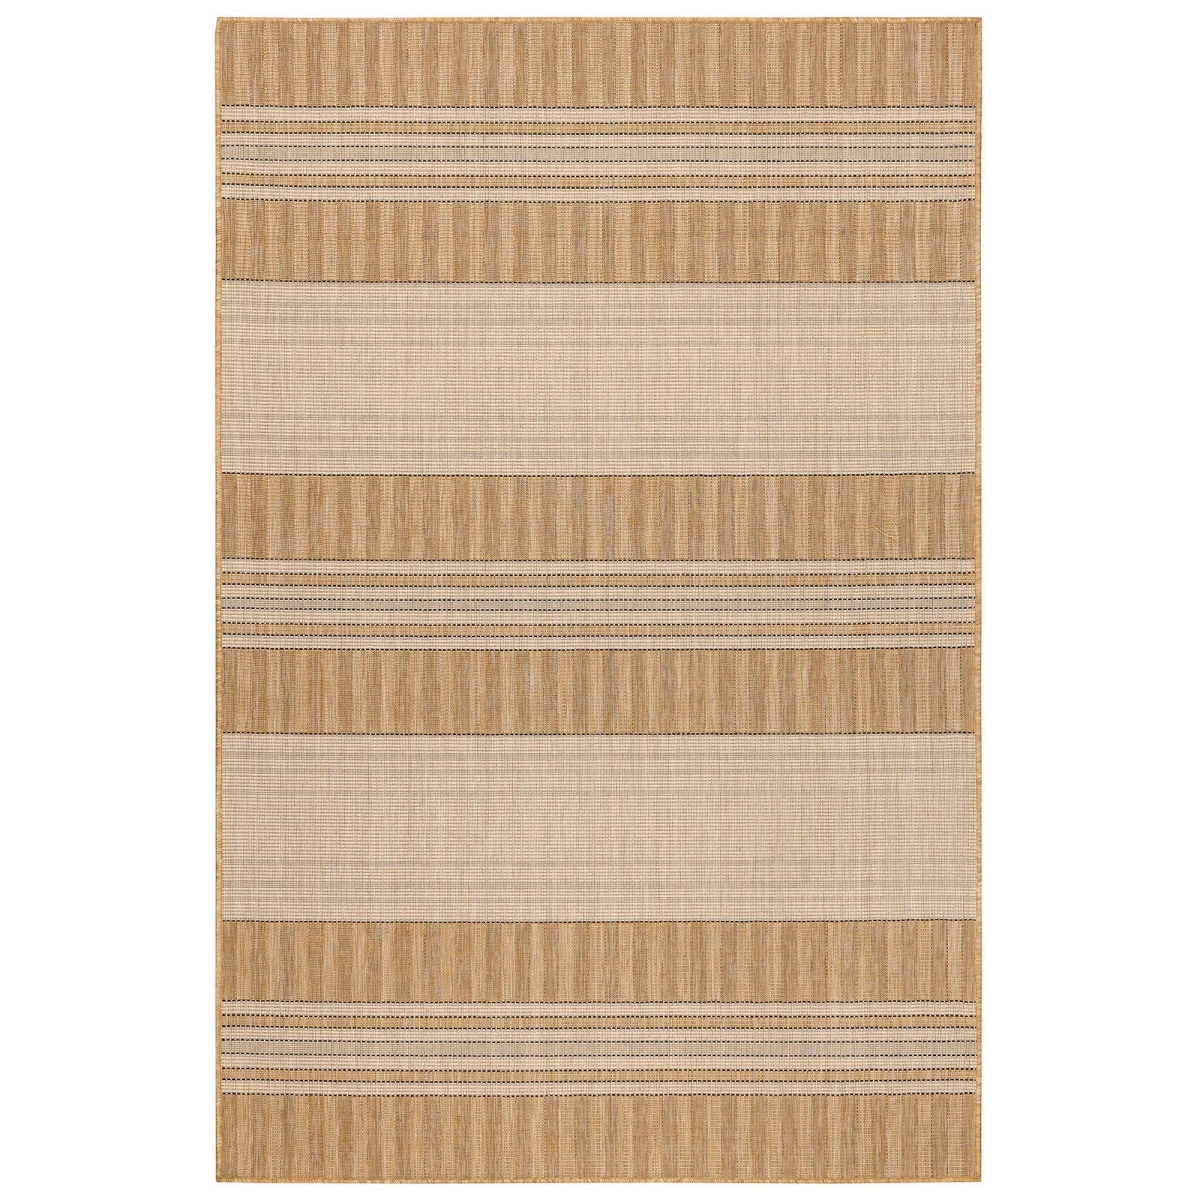 Trans-ocean Imports Cre58843512 4 Ft. 10 In. X 7 Ft. 6 In. Liora Manne Carmel Stripe Indoor & Outdoor Wilton Woven Rectangle Rug - Sand